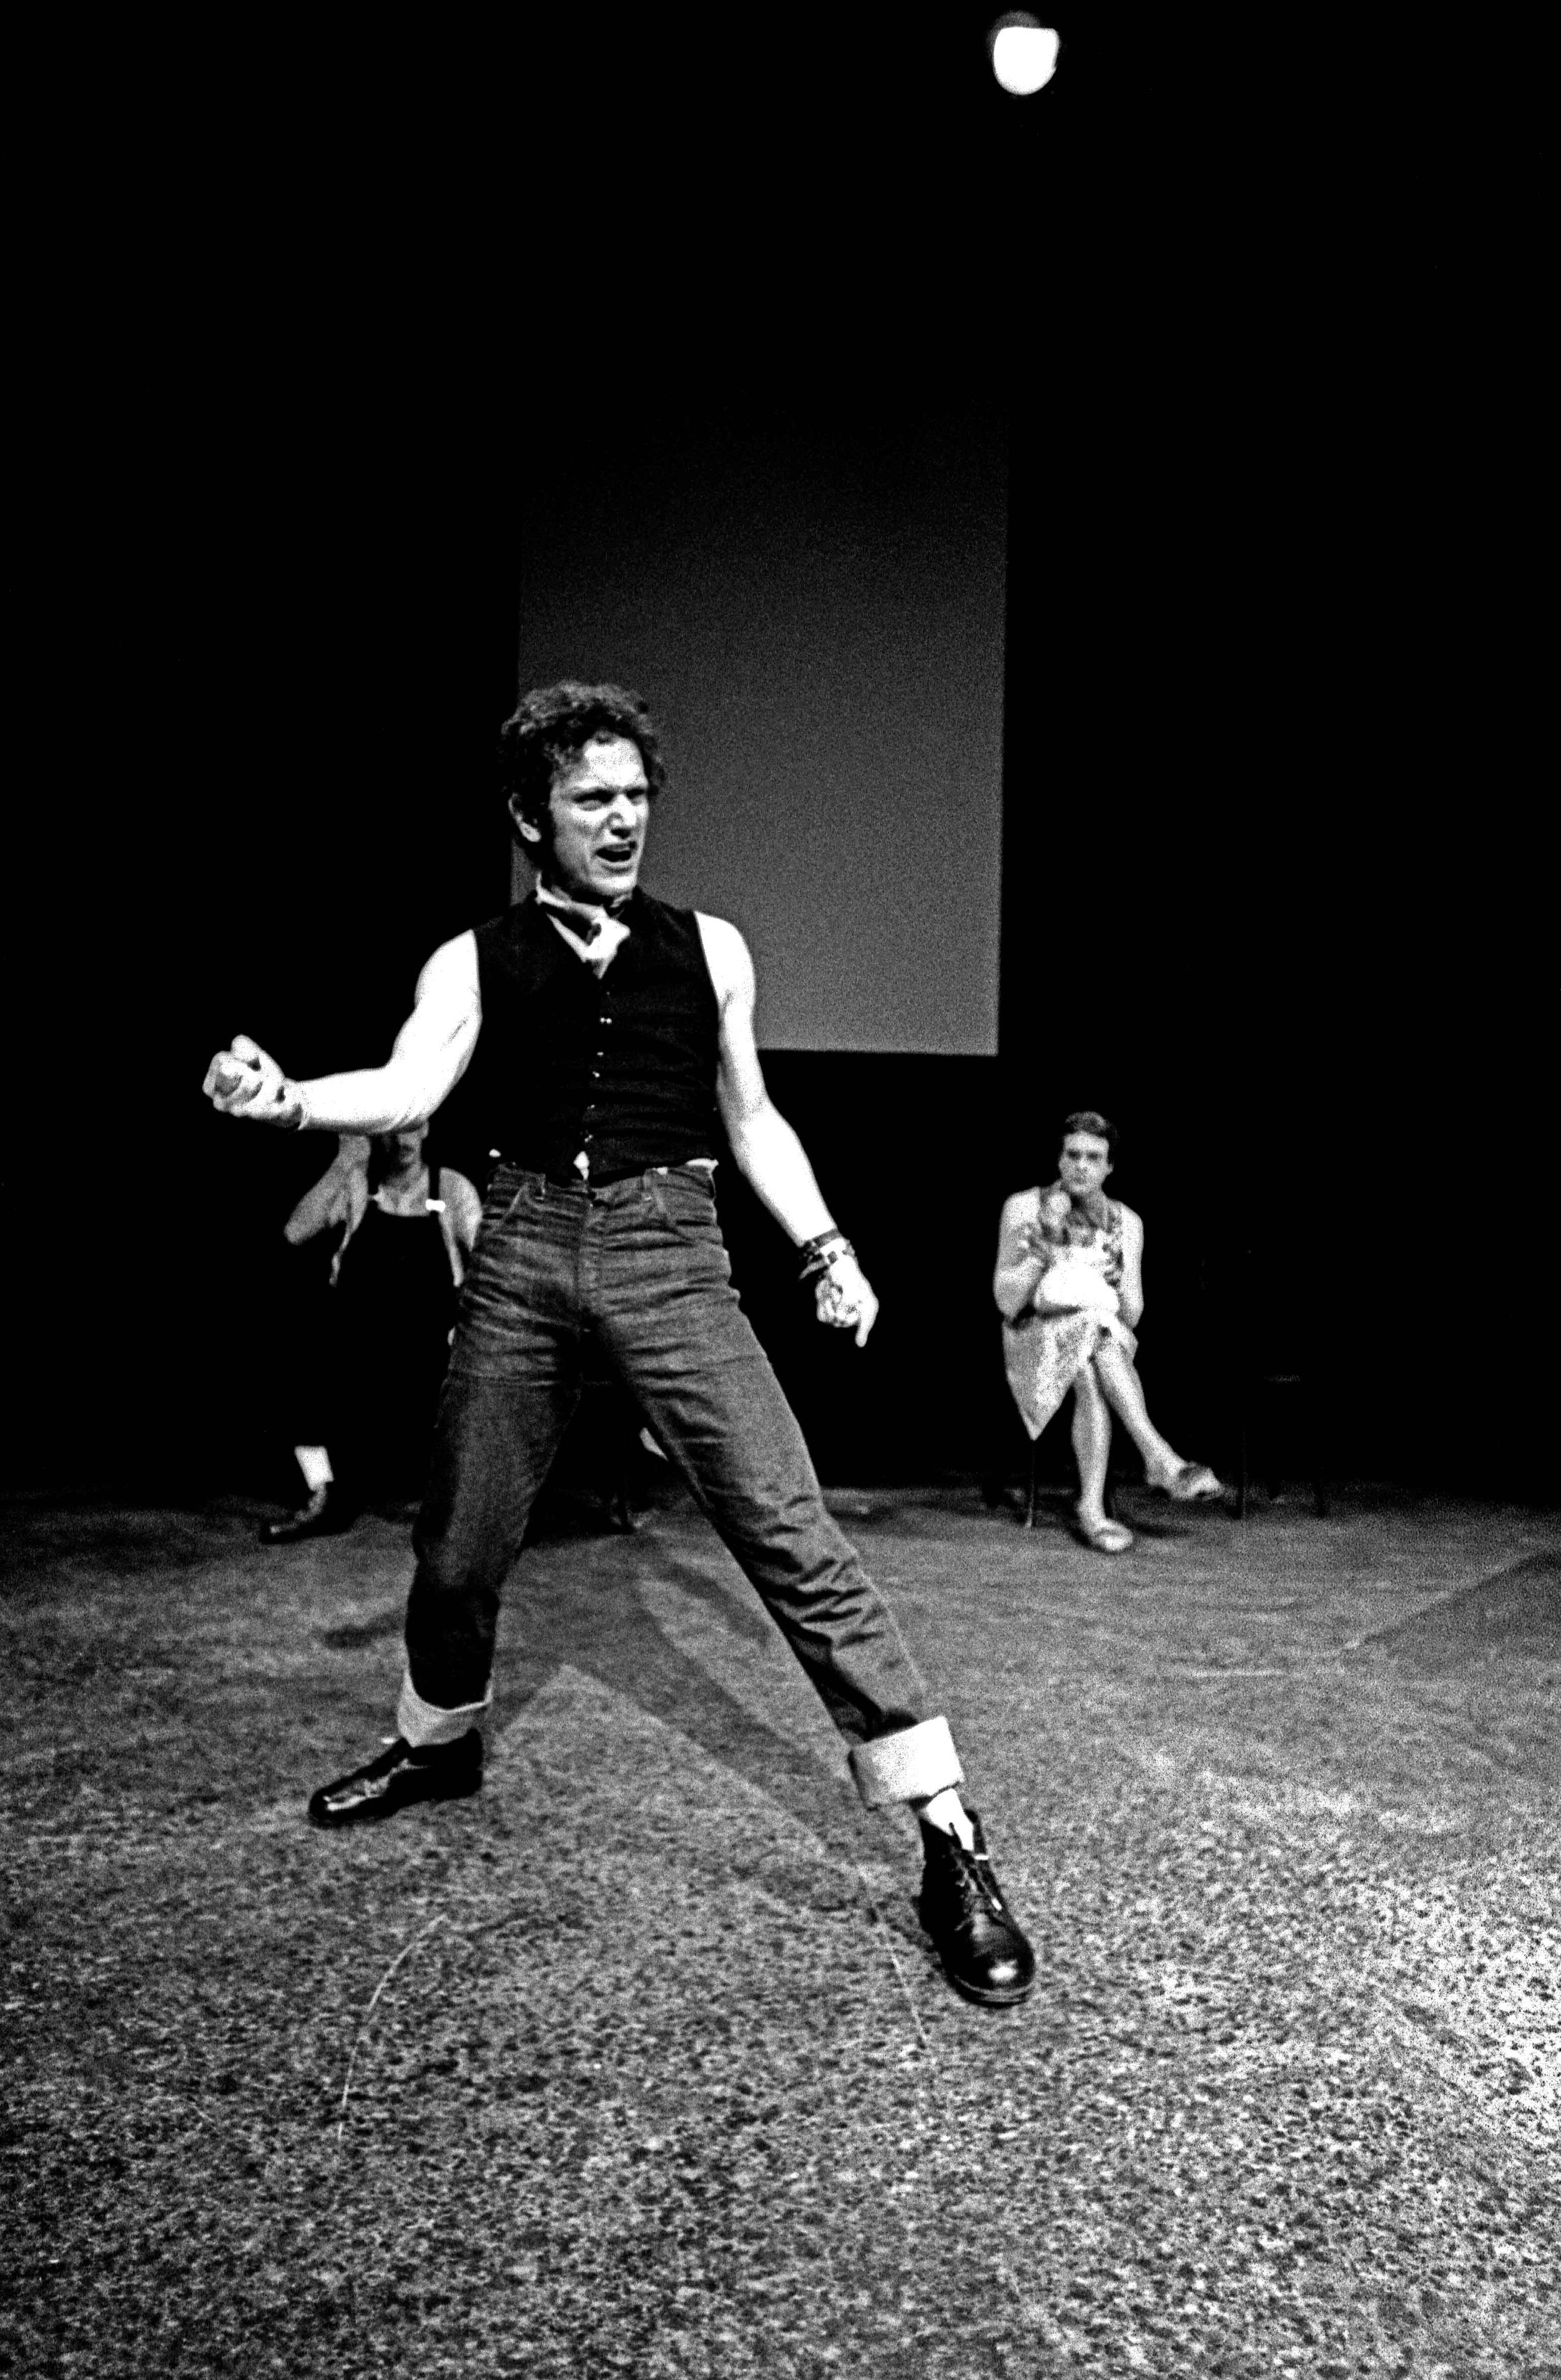 East by Steven Berkoff. Mike rages against the world.